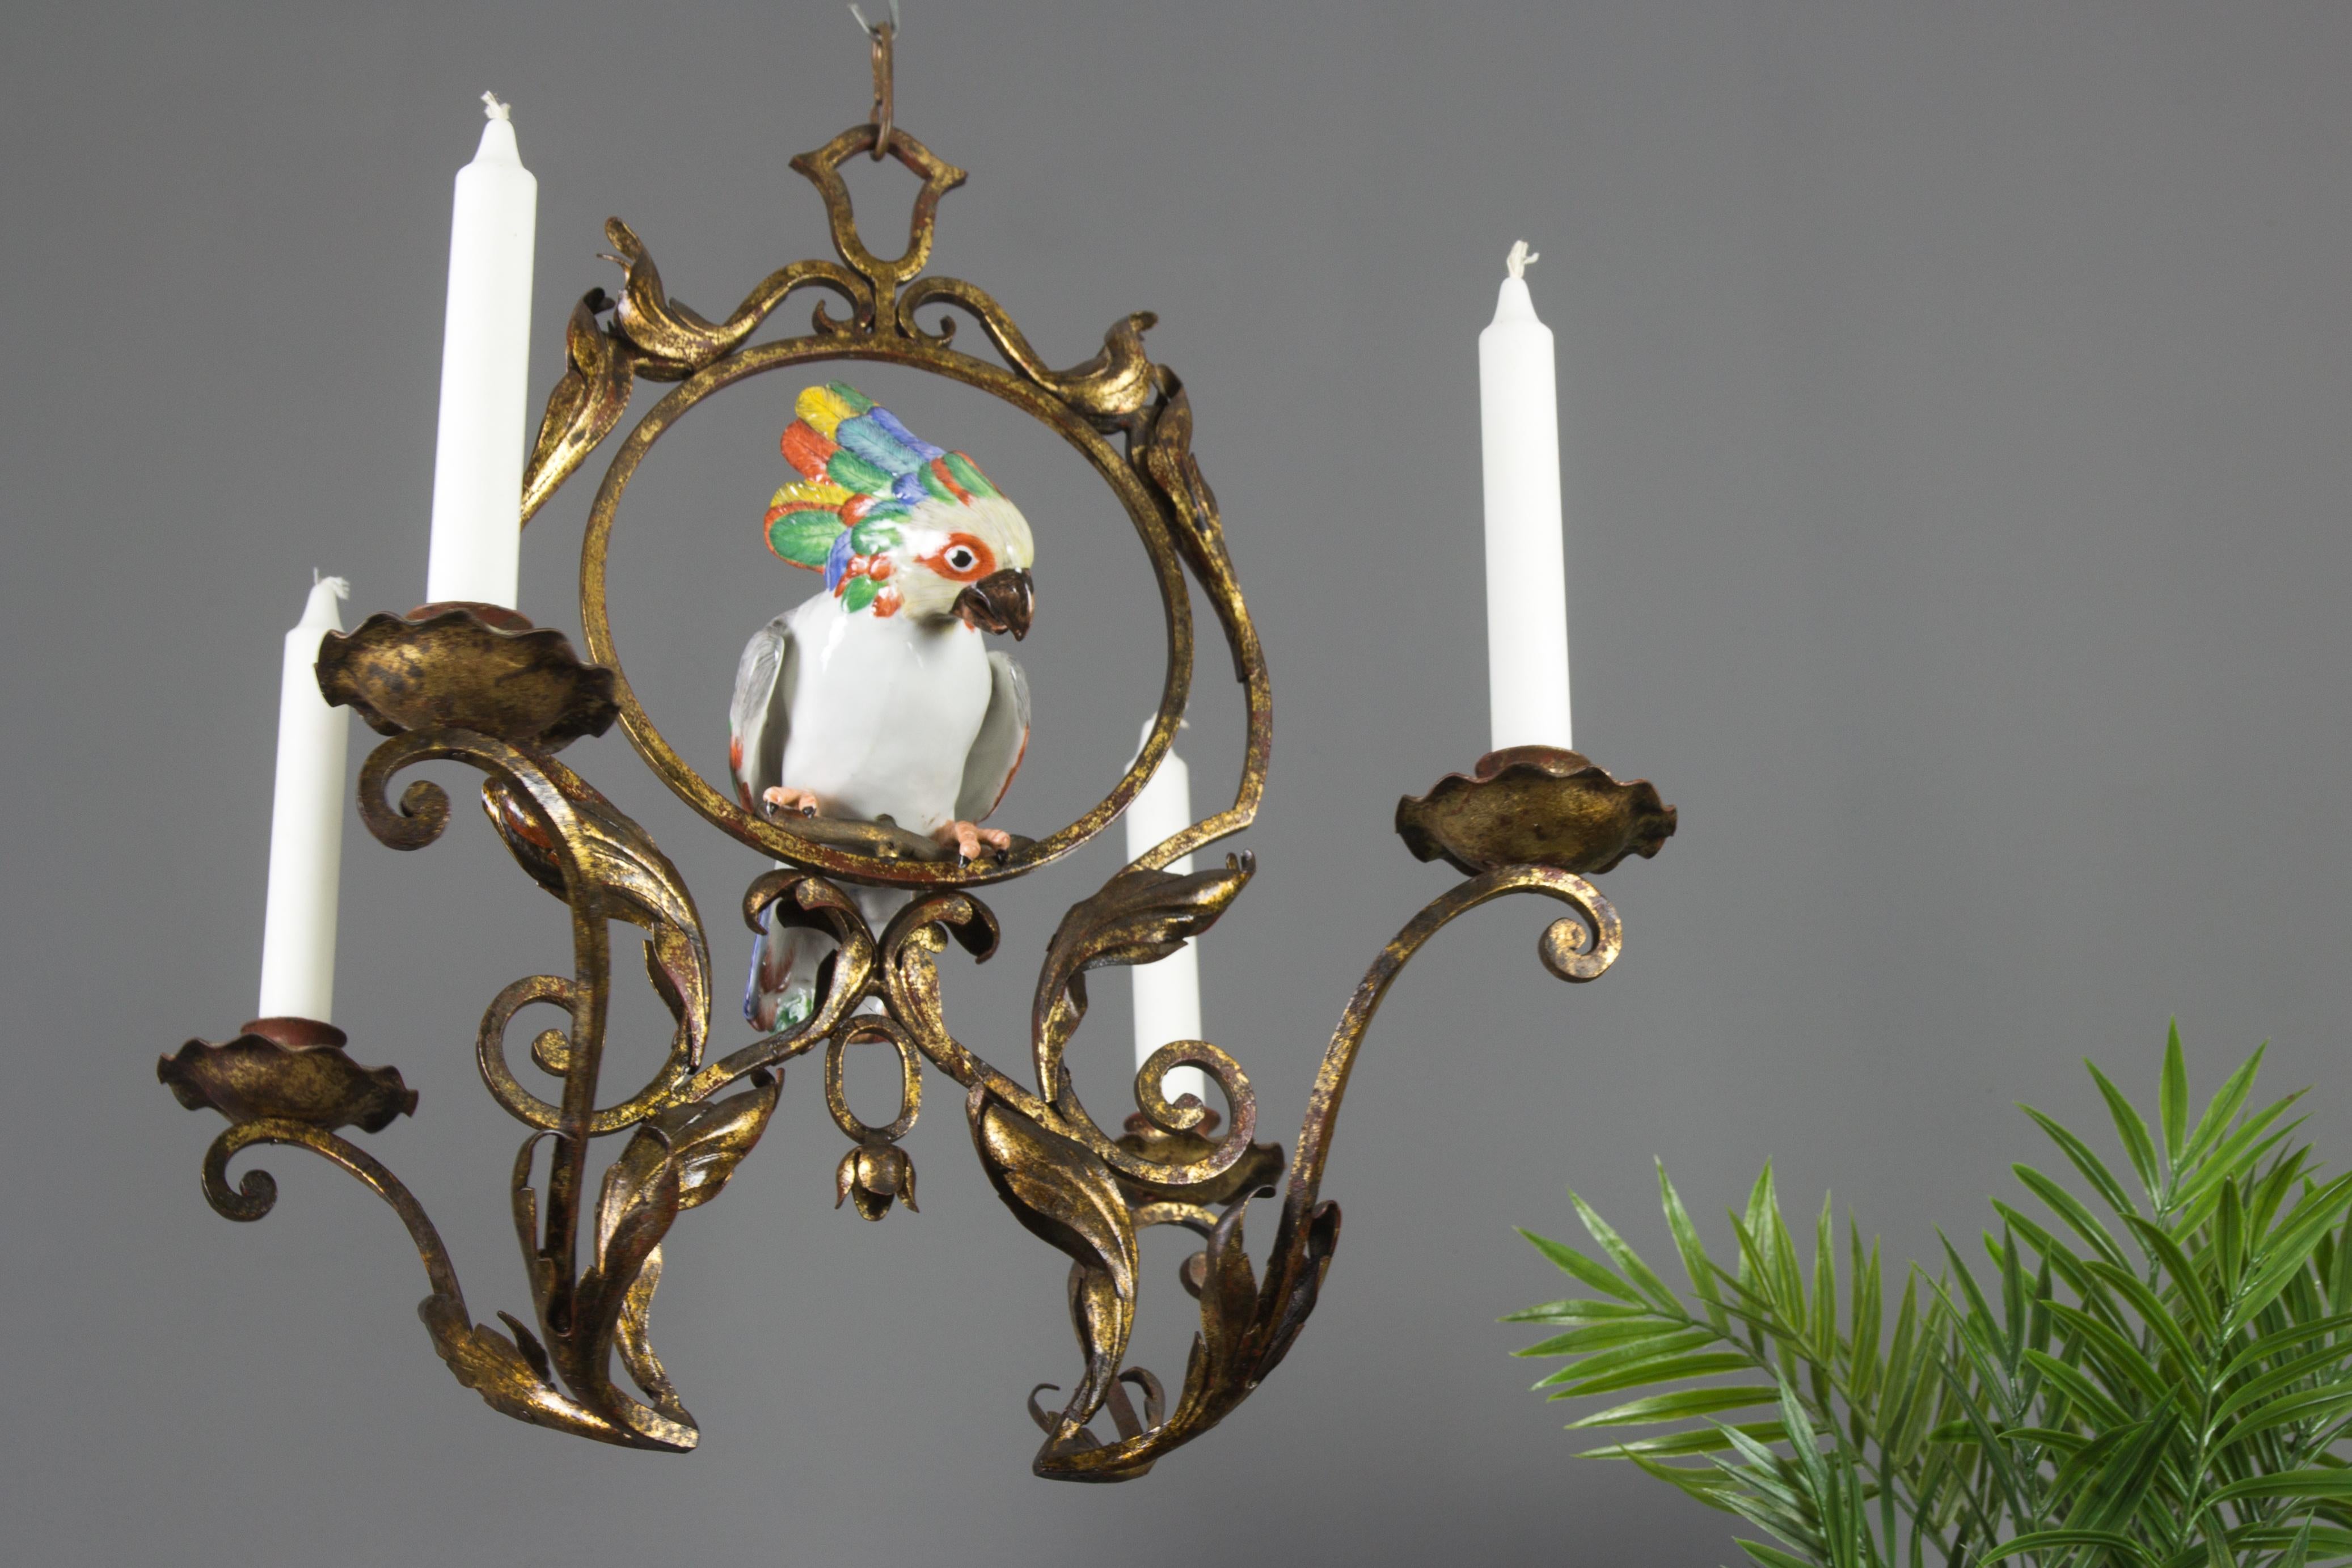 This adorable French Art Nouveau style wrought iron candle chandelier features four arms or candleholders with beautifully shaped details toned in golden color and centered with an impressive colorful porcelain parrot figurine.
Dimensions: Height 45